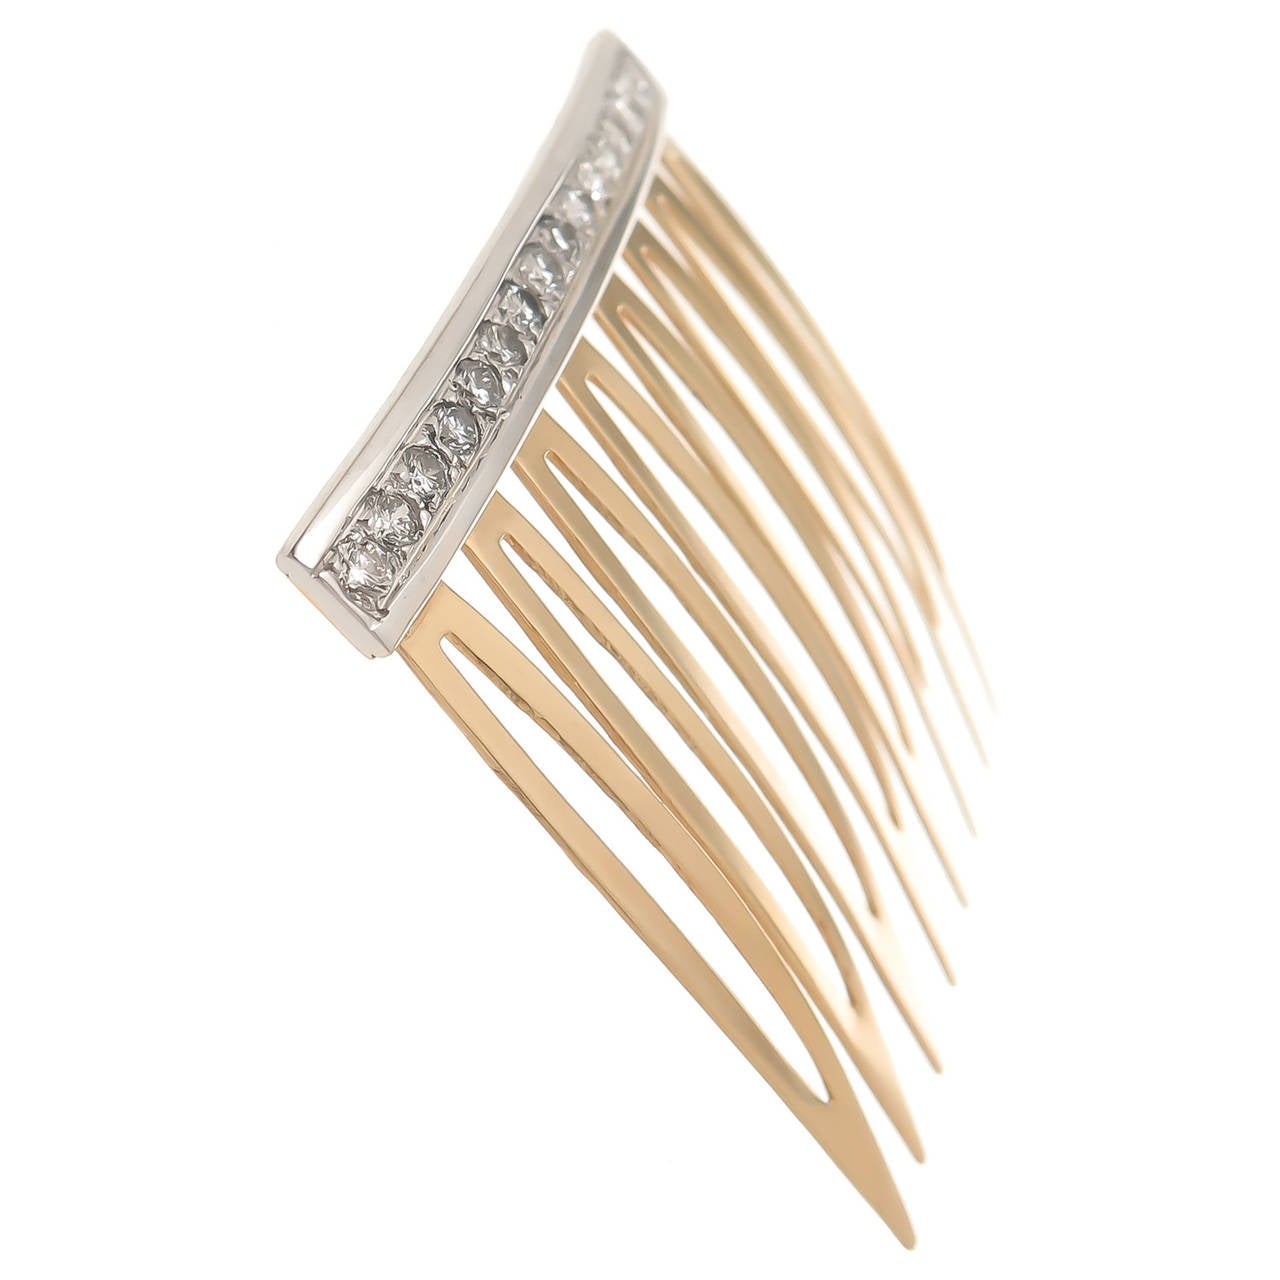 Circa 1970s 14K Yellow Gold and Diamond Hair Comb. Measuring 1 5/8 inch in length X 1 5/8 Inch and set with 16 Round Brilliant cut Diamonds totaling .65 Carat.